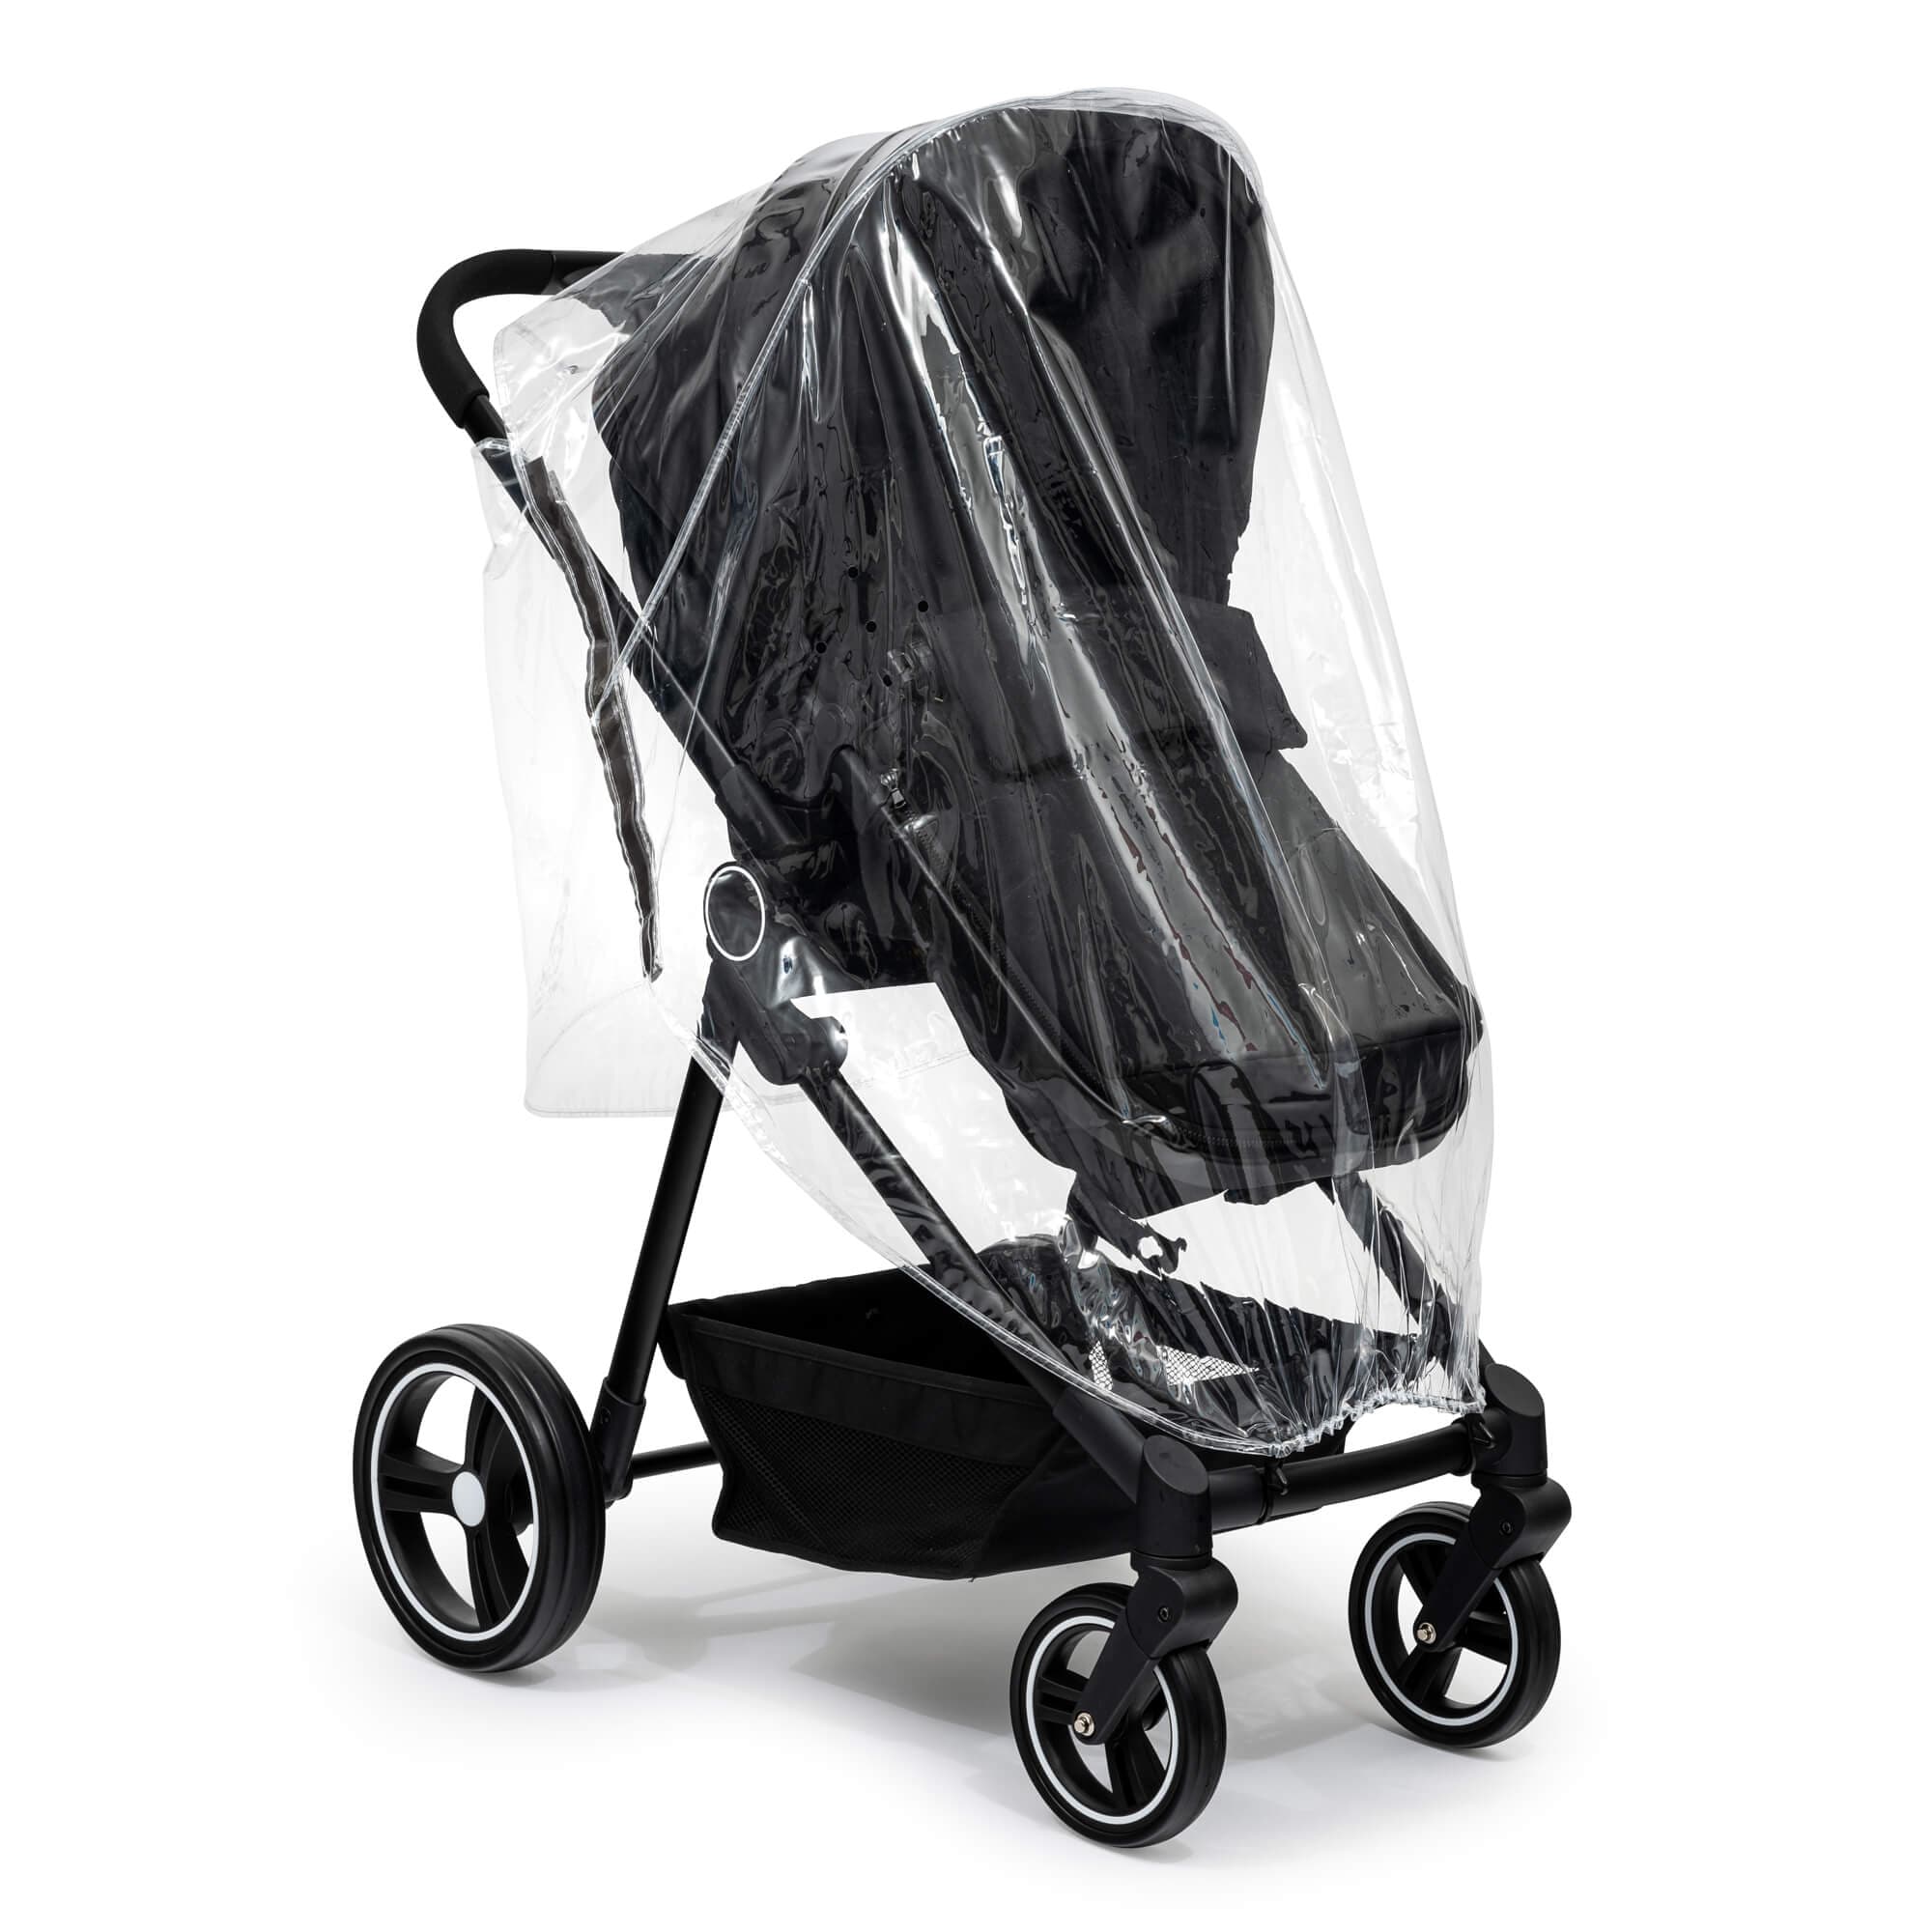 Pushchair Raincover Compatible With DoBuggy - For Your Little One